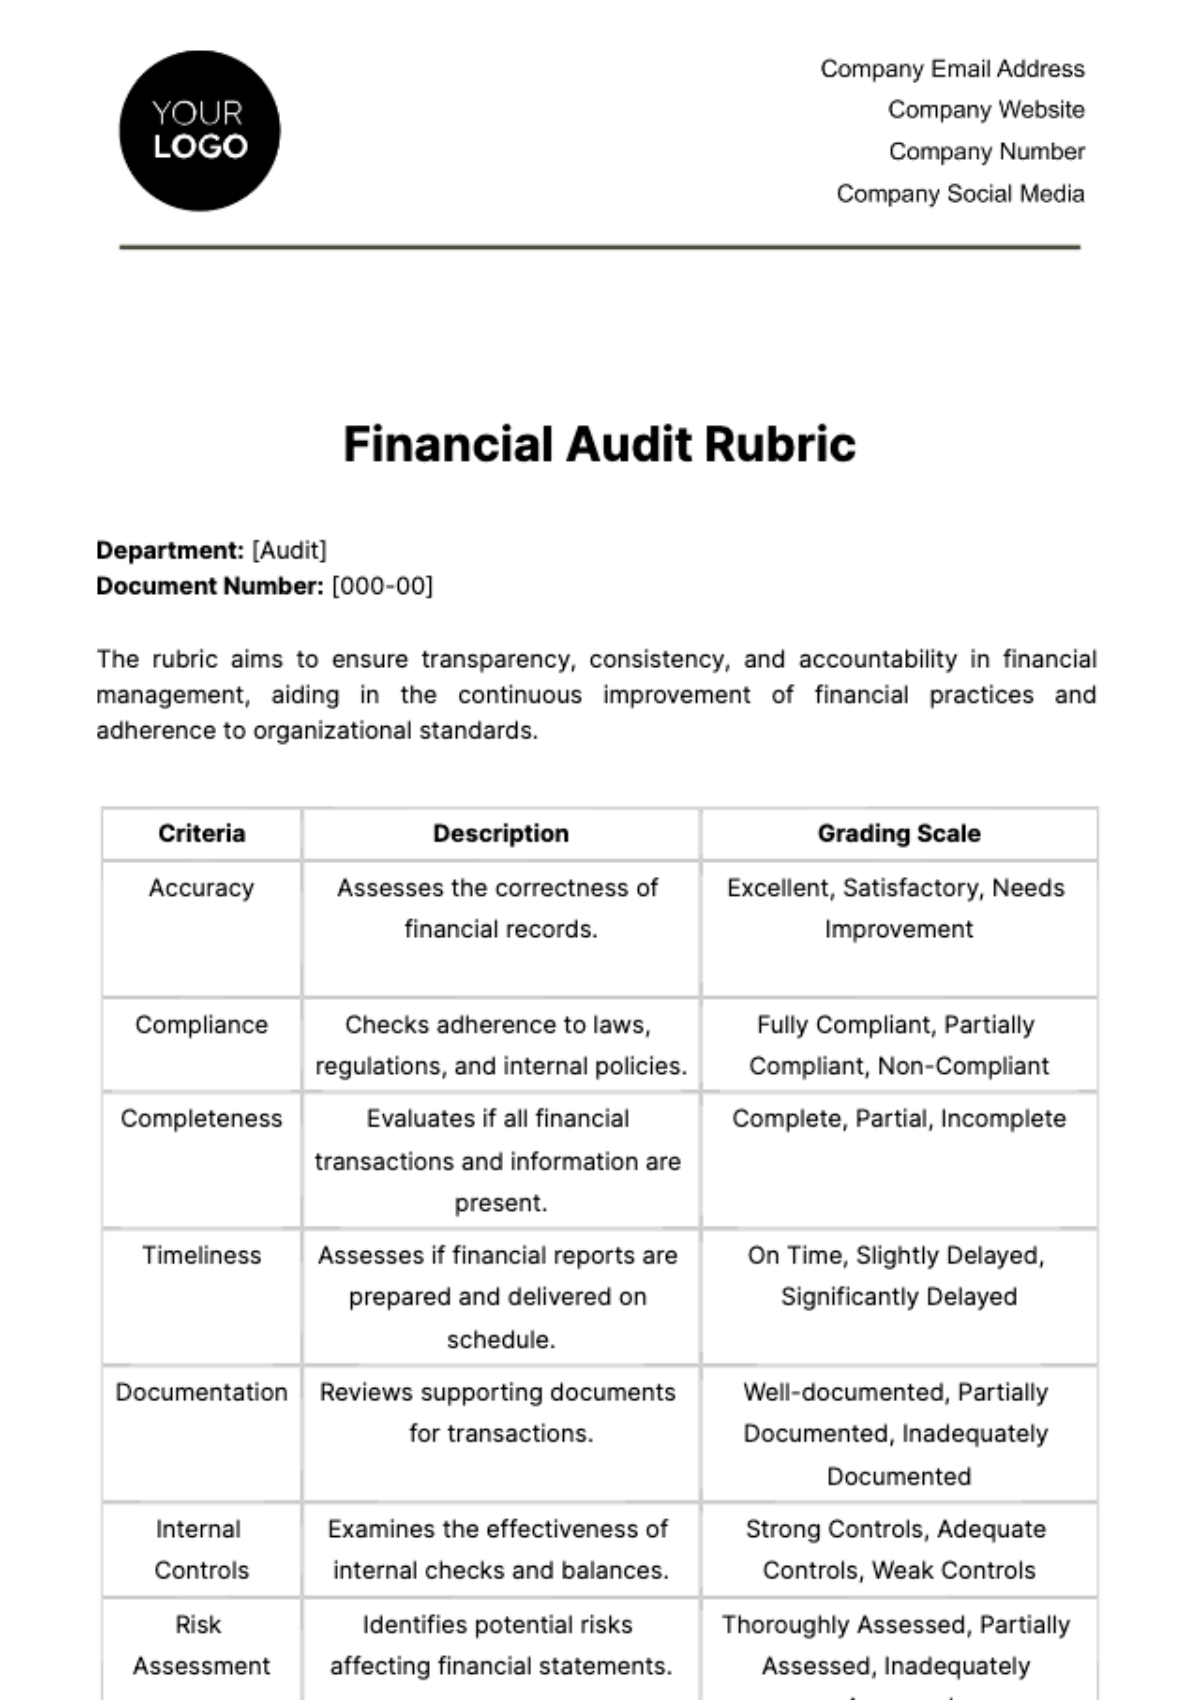 Free Financial Audit Rubric Template